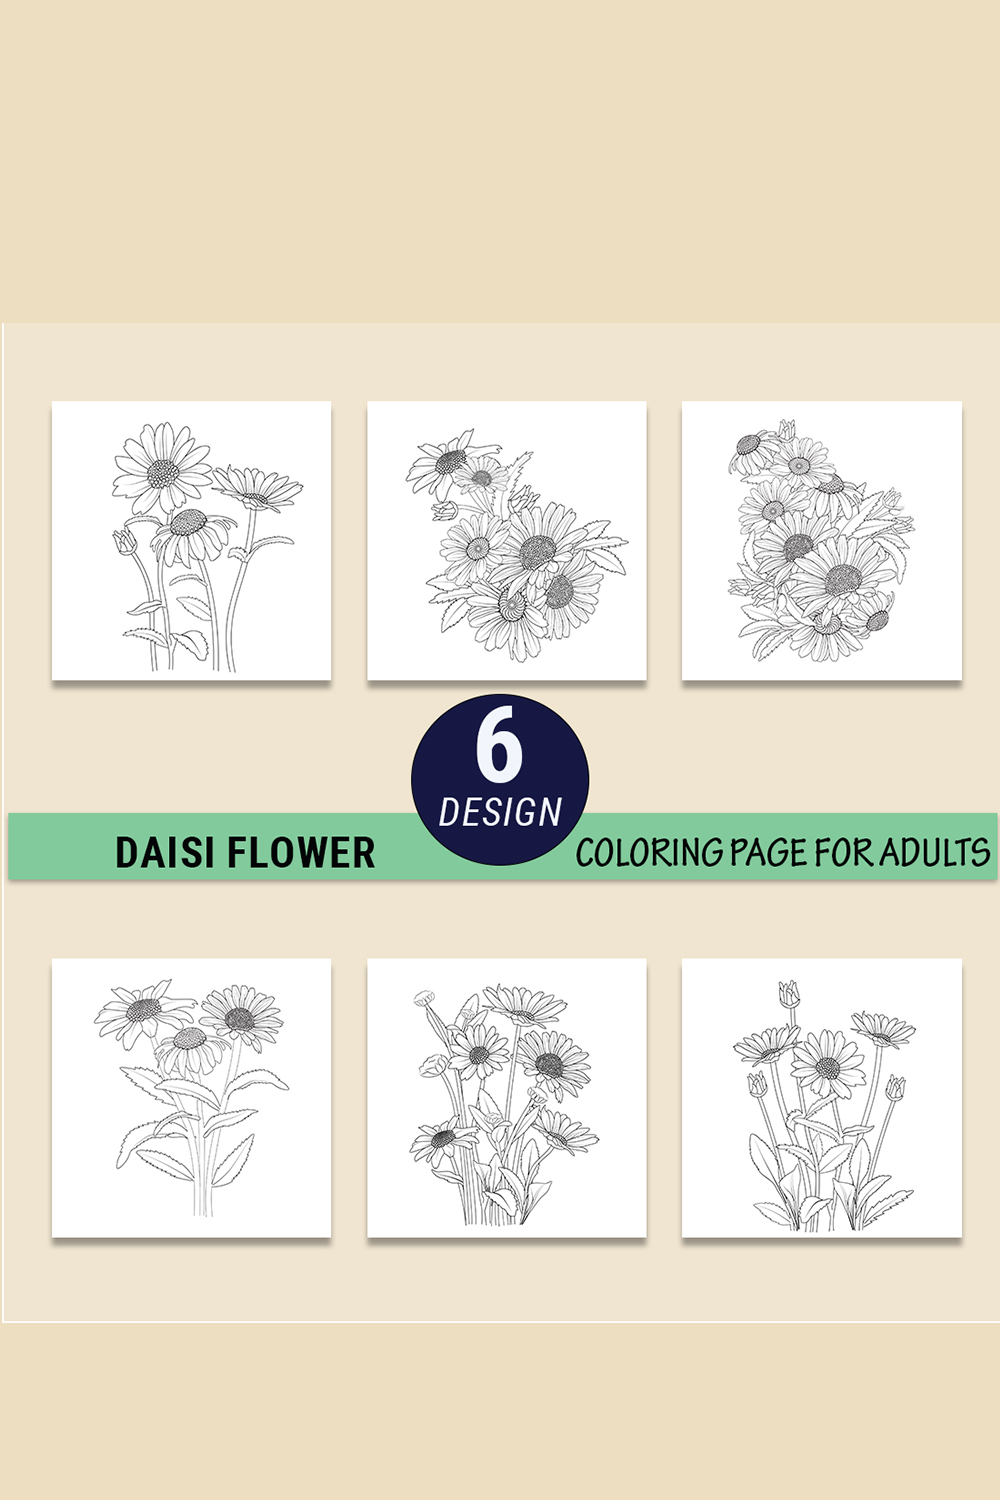 Daisy flower coloring pages, daisy flower bouquet tattoo, small daisy tattoo, elegant minimalist daisy tattoo pinterest preview image.